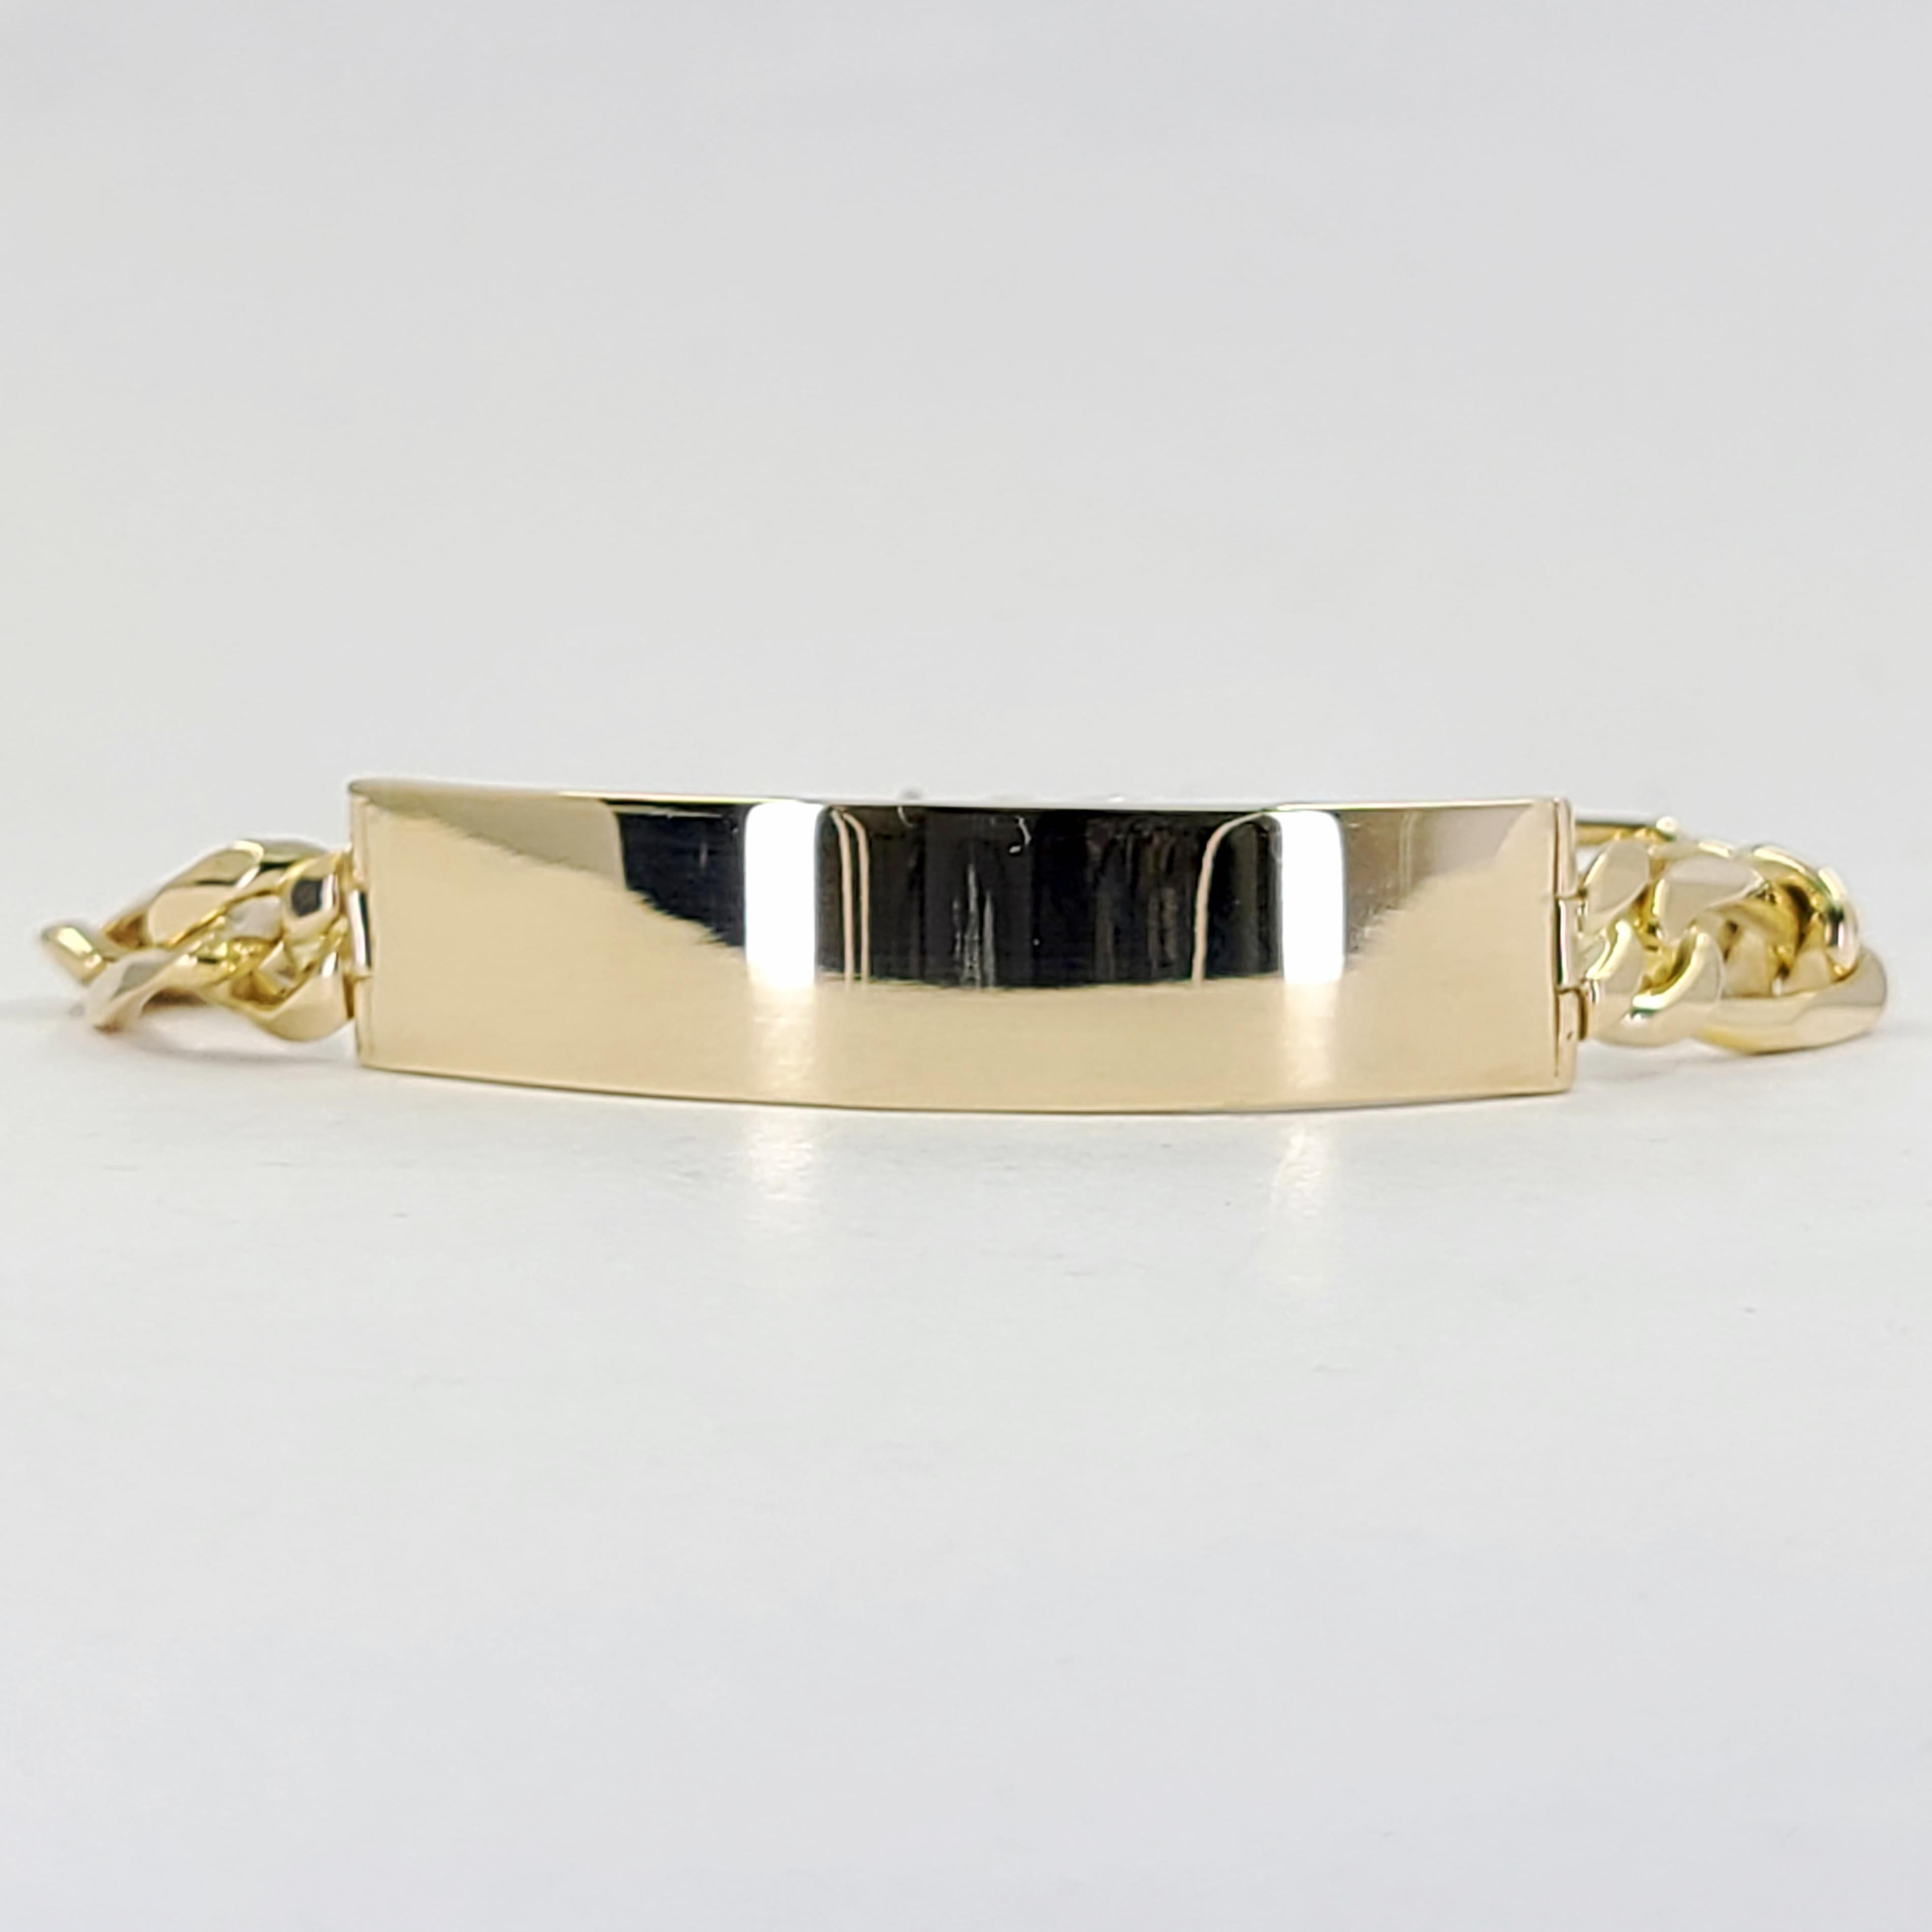 14 Karat Yellow Gold 12.25mm Wide Engravable ID Bracelet With Figaro Chain Measuring 8 Inches Long. Box Clasp With Figure 8 Safety Clasp. Finished Weight Is 37 Grams.